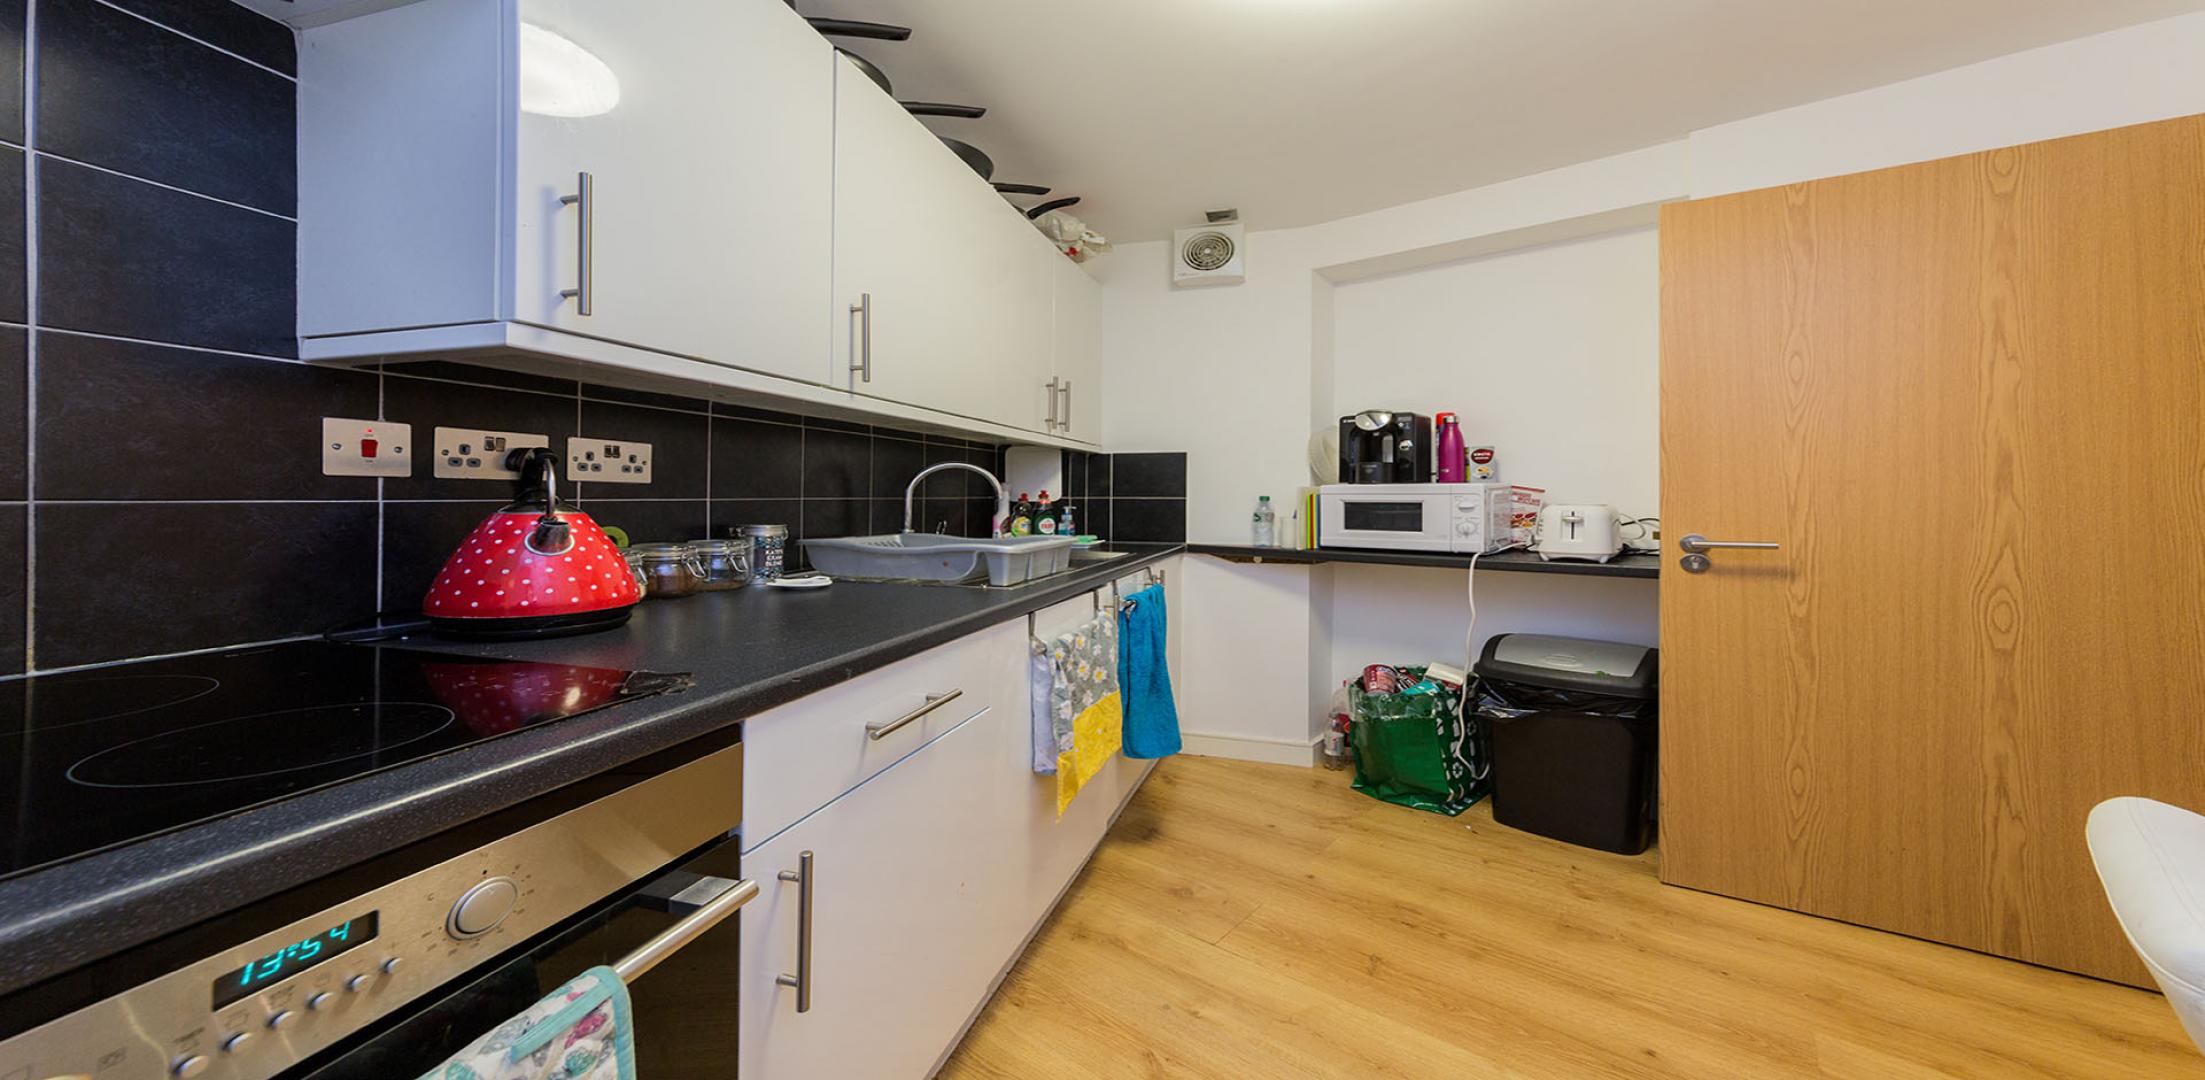 			PERFECT FOR 3 OR 4 SHARERS!, 3 Bedroom, 1 bath, 1 reception Apartment			 Criterion Mews, ARCHWAY N19